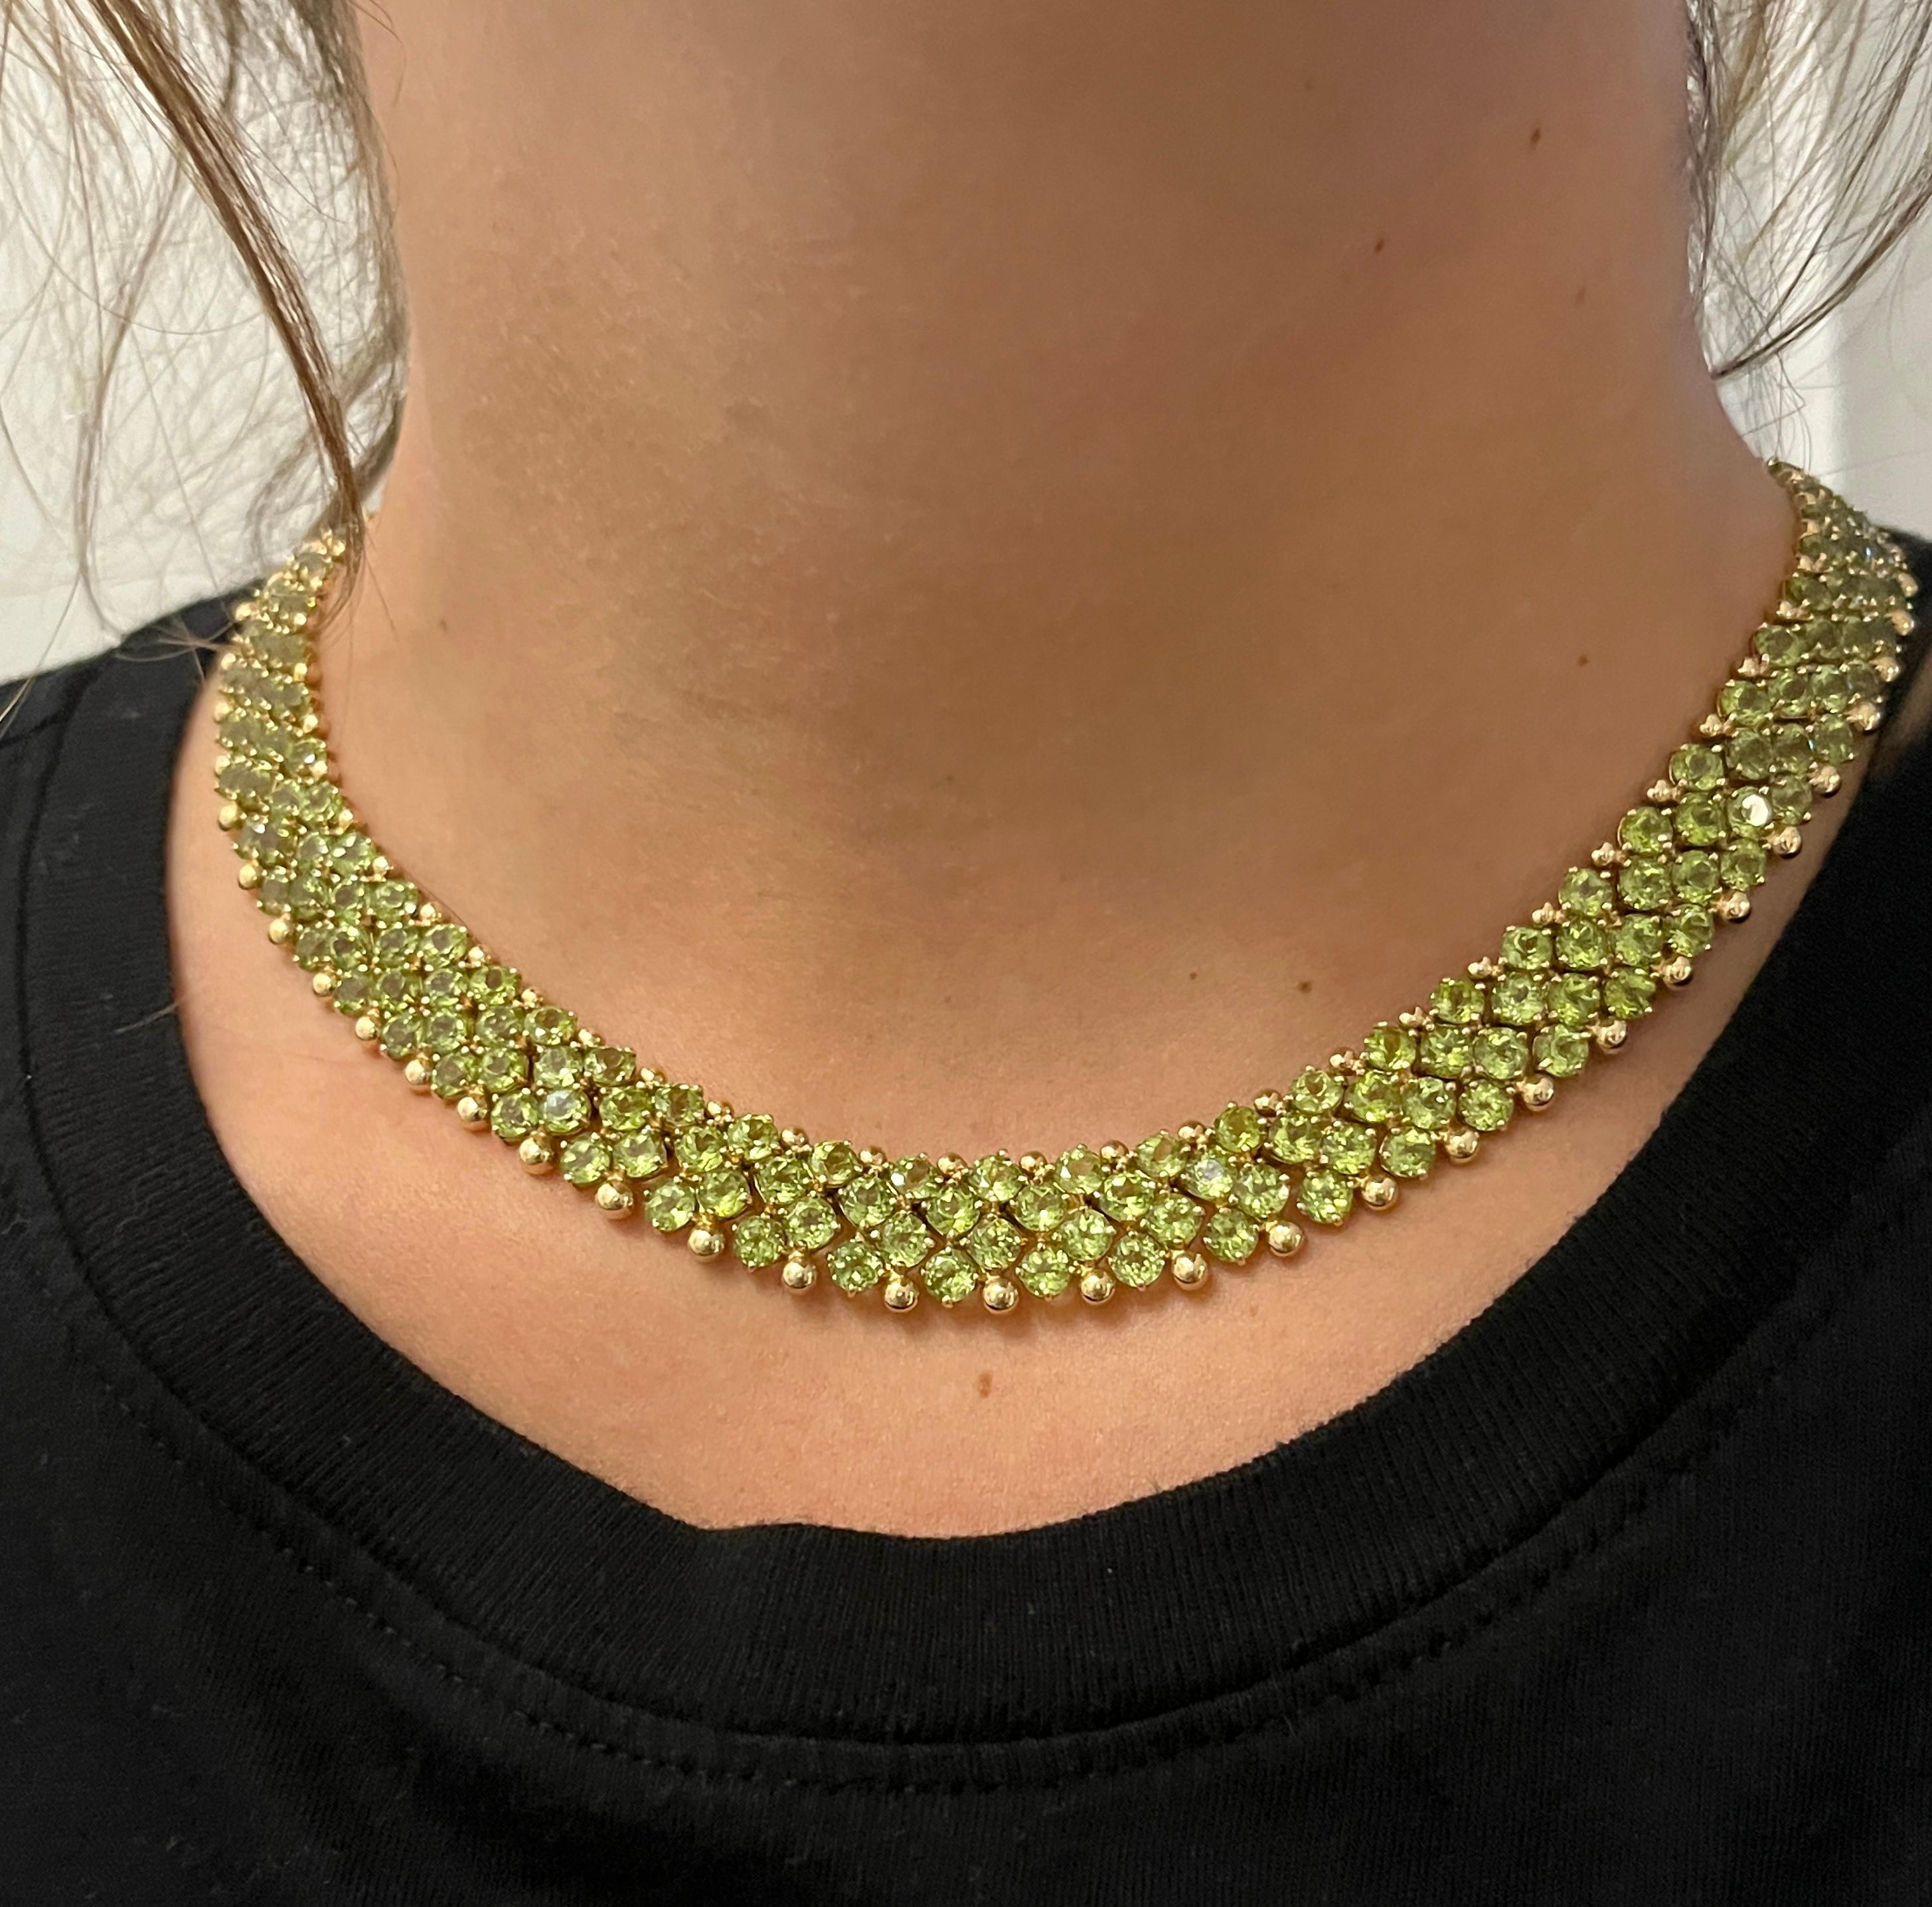 Women's 45 Carat Mixed Cut Green Peridot Cluster Choker Necklace in 14K Yellow Gold For Sale